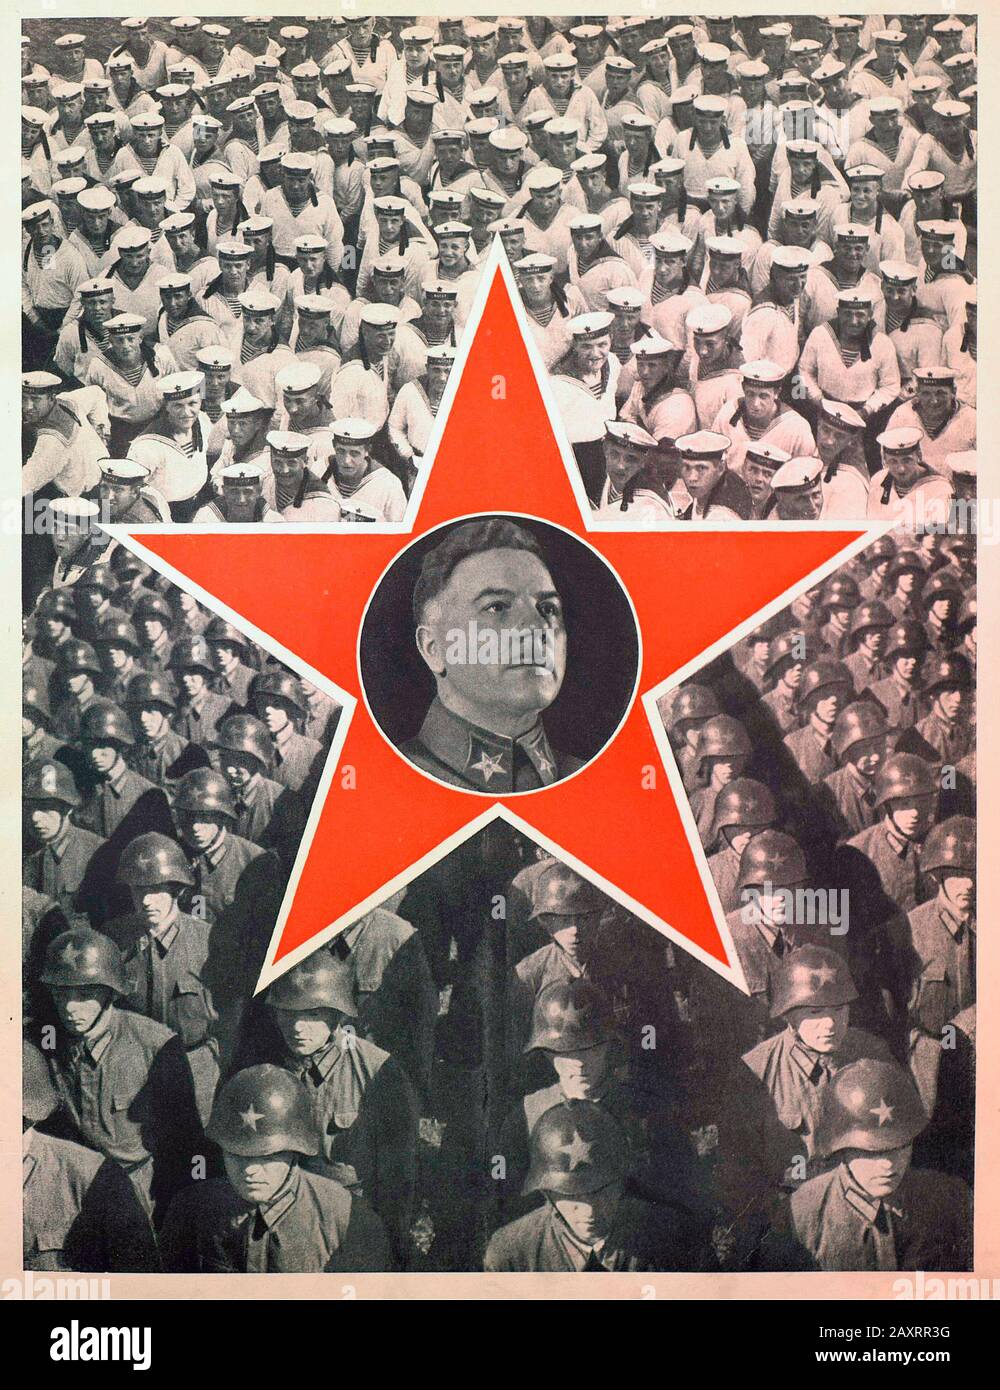 Red Army. From soviet propaganda book of 1937. Marshal Voroshilov on the background of the red star. Stock Photo